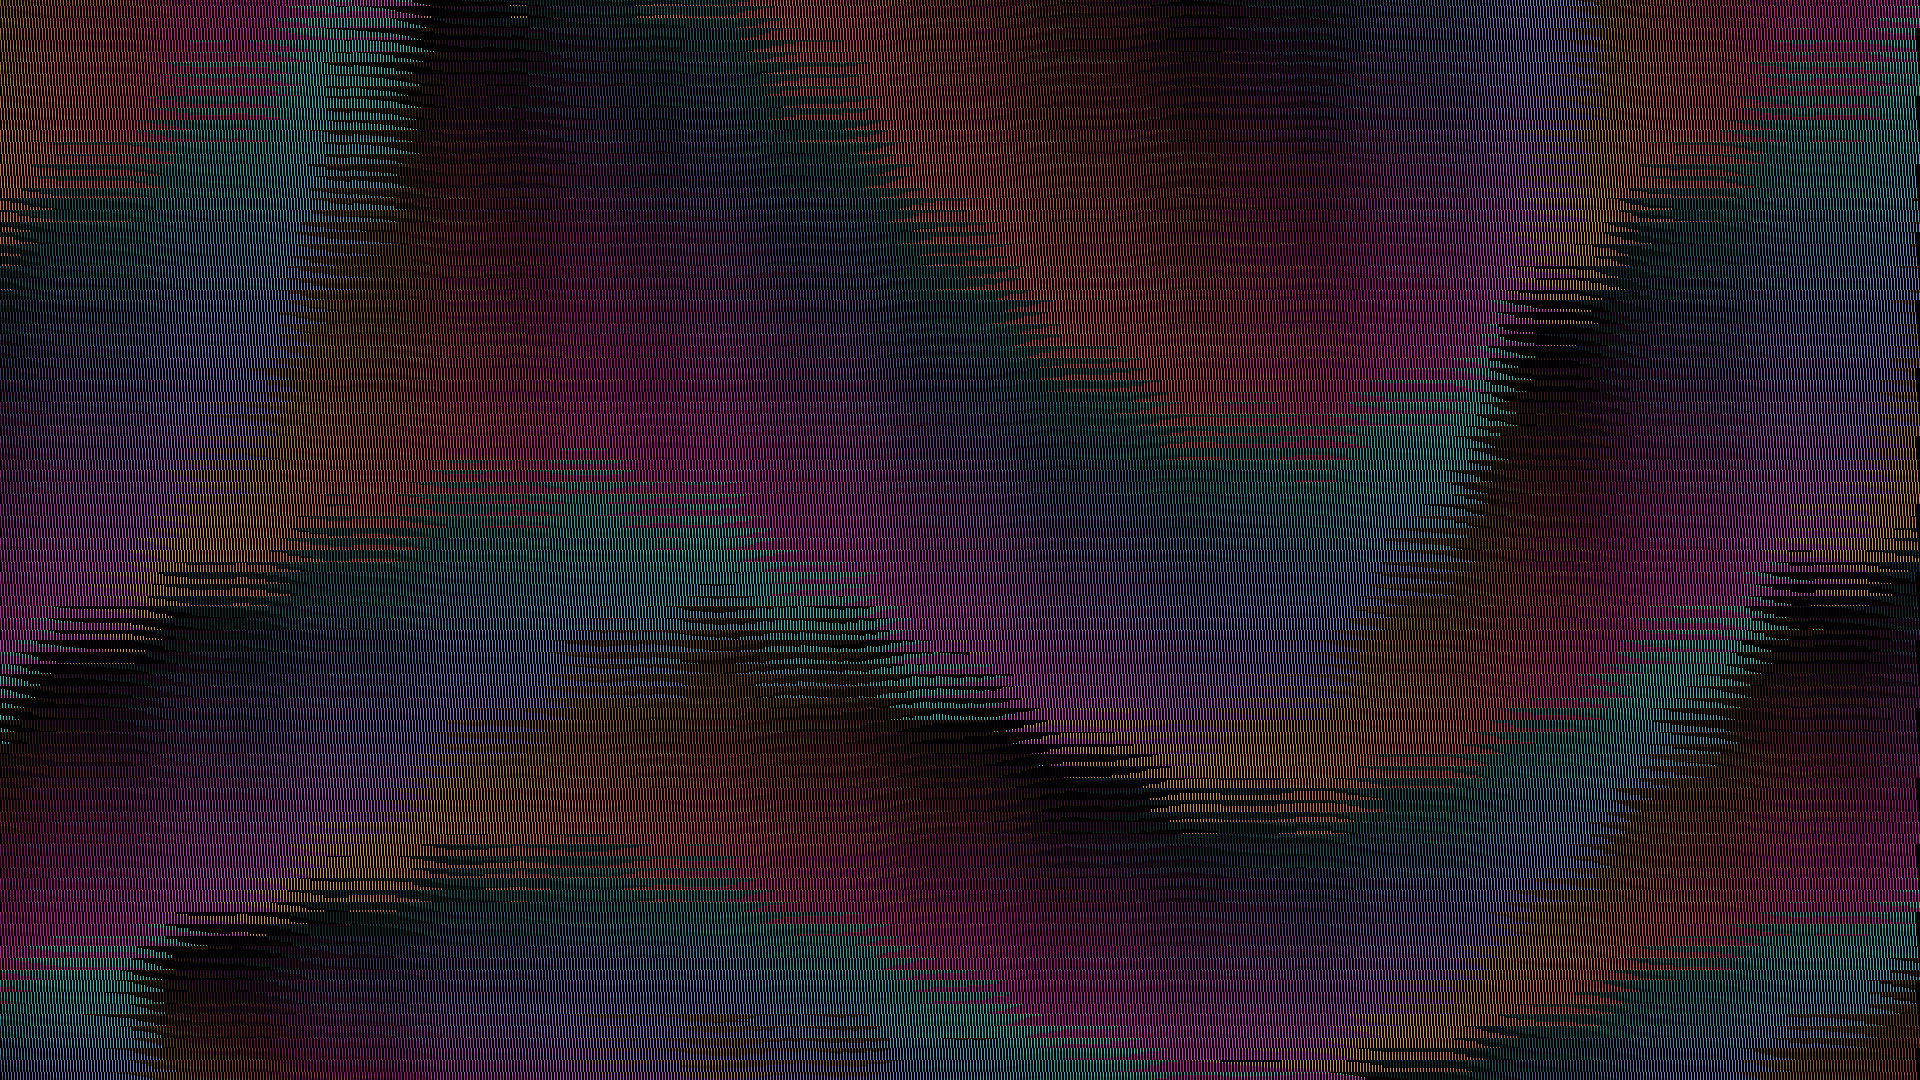 Mesmerizing, Hypnotic Animated GIFs. GIFs ONLY Please ...